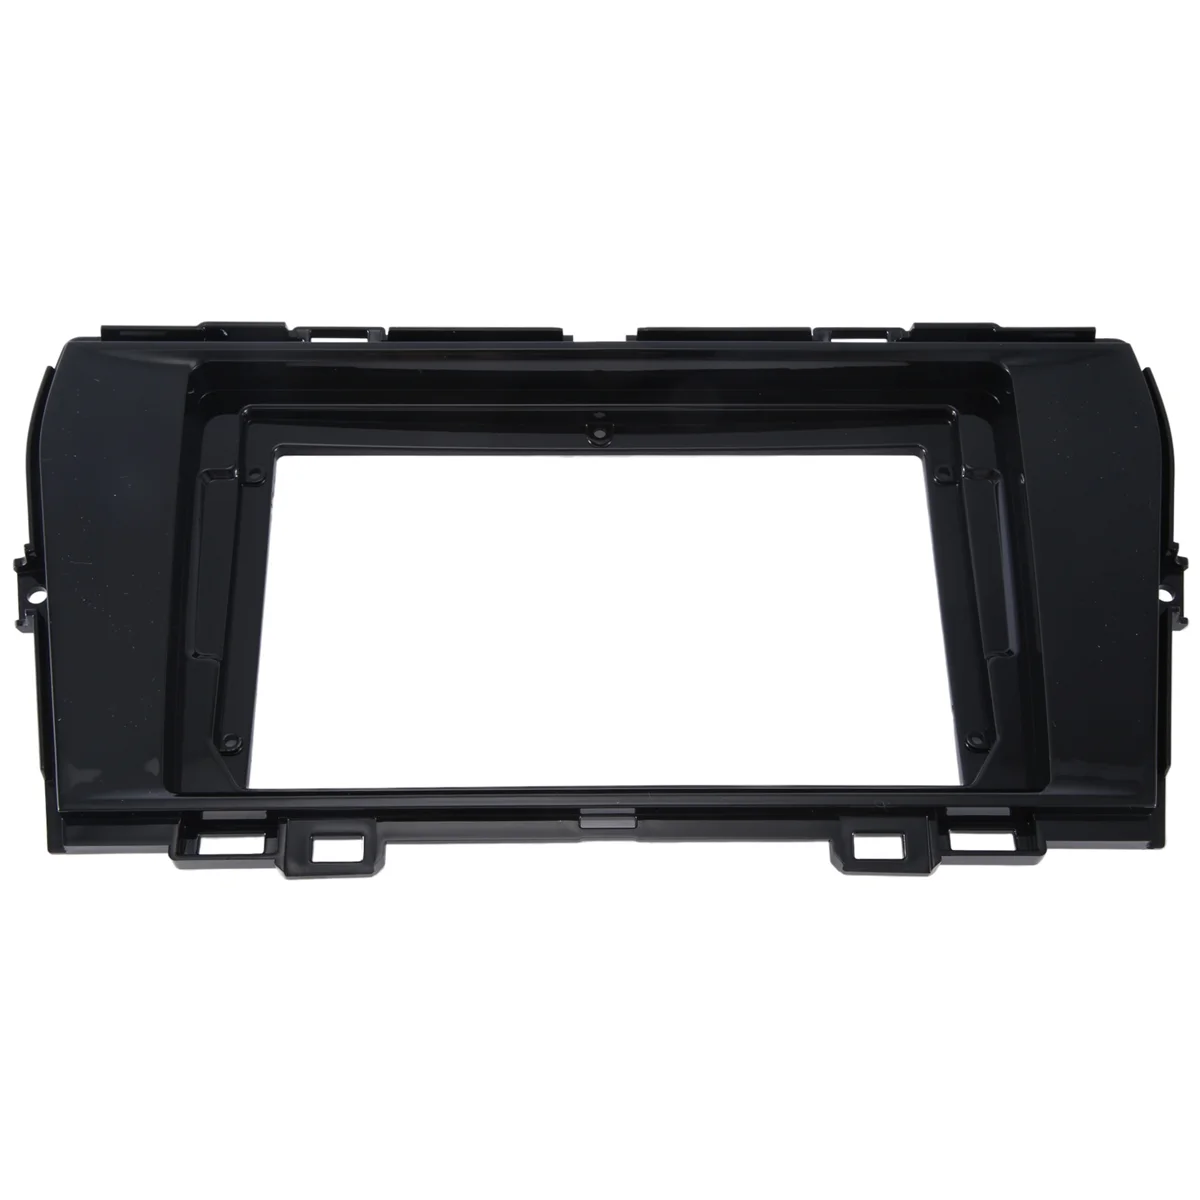 

9 Inch 2 Din Dashboard Frame Radio for SSANG YONG SsangYong Tivoli 2019-2021 Fascia Dash MP5 Player DVD Adapter Panel